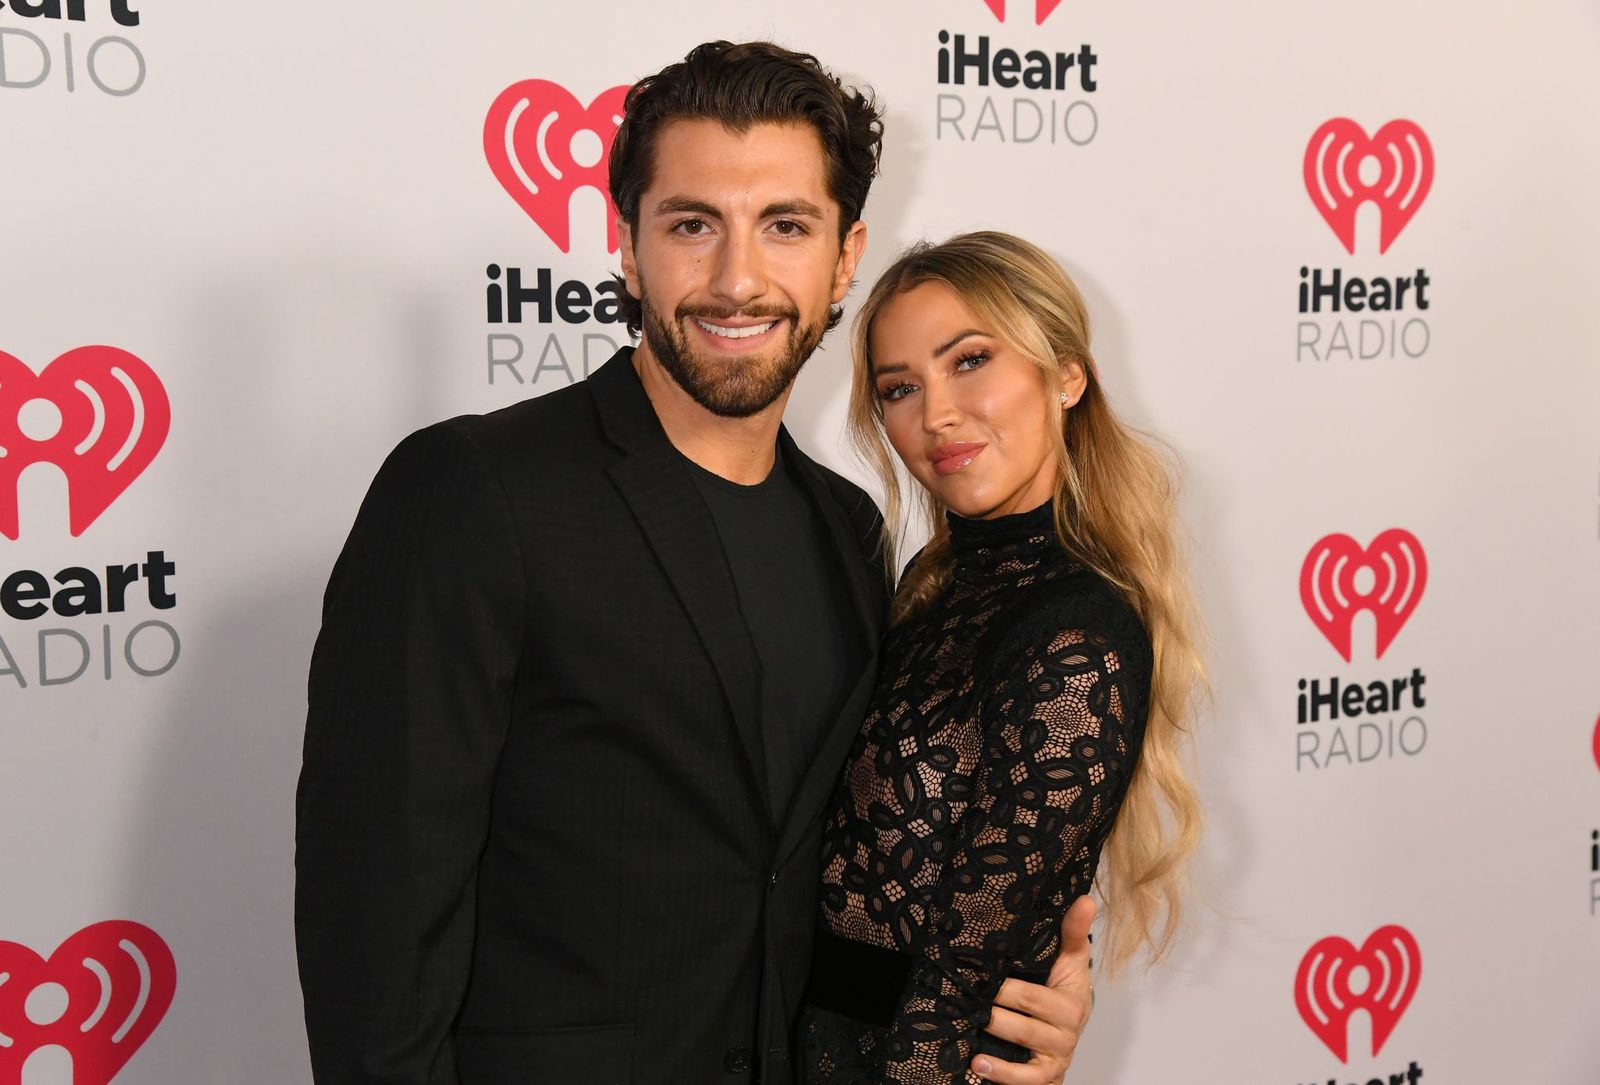 Jason Tartick and Kaitlyn Bristowe at the 2020 iHeartRadio Podcast Awards in January 2020 in Burbank, California | Source: Getty Images